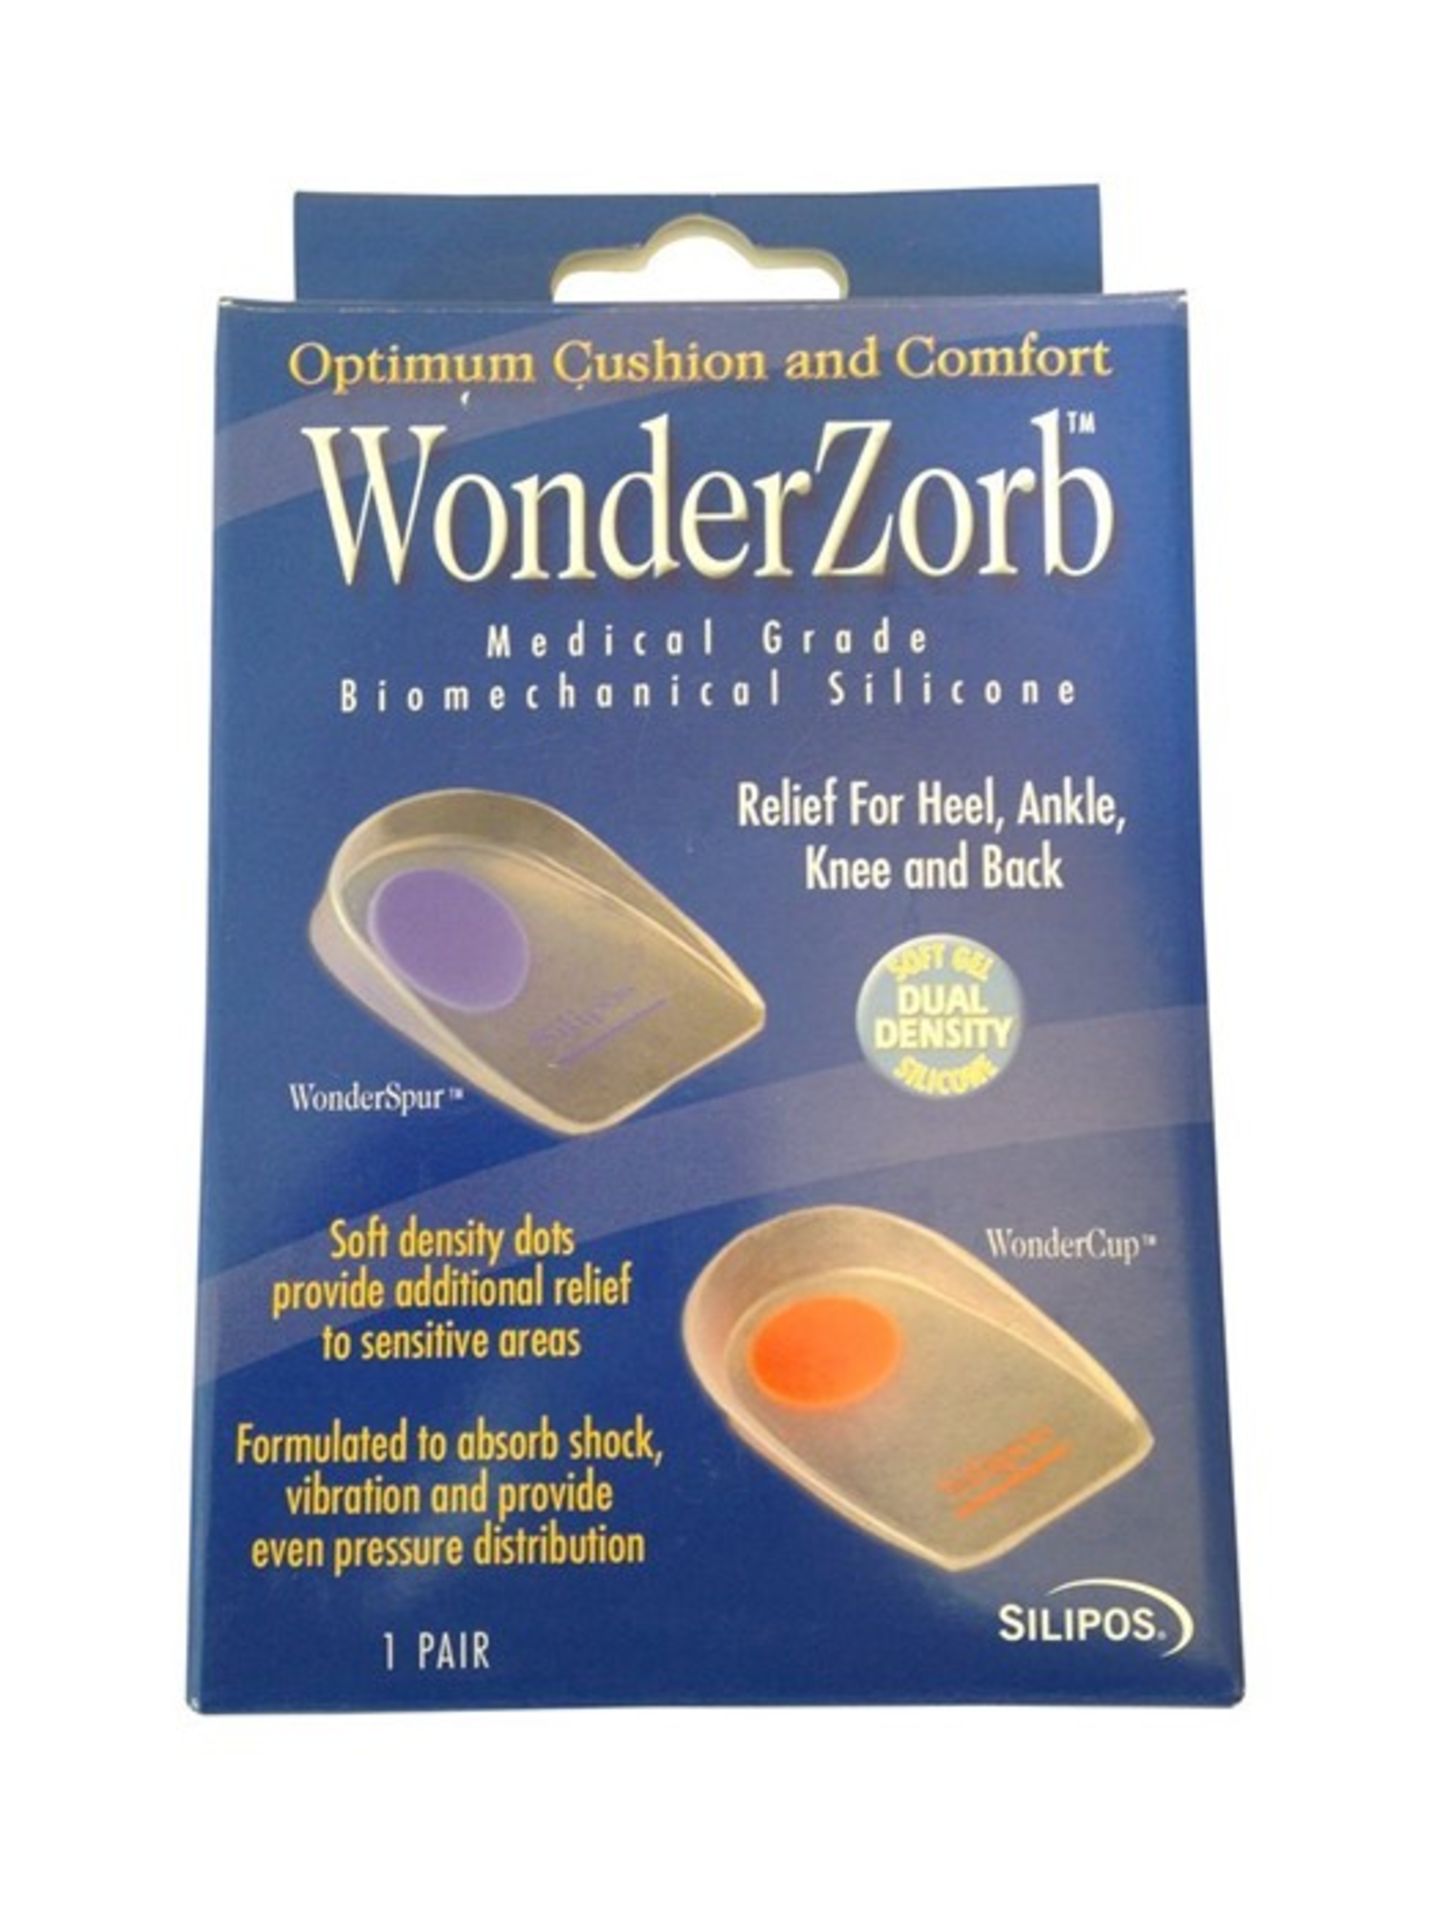 ME : 1 LOT TO CONTAIN 2 BOXES OF SILIPOS WONDERZORB WONDERSPUR / EACH BOX CONTAINS 1 PAIR / RRP £